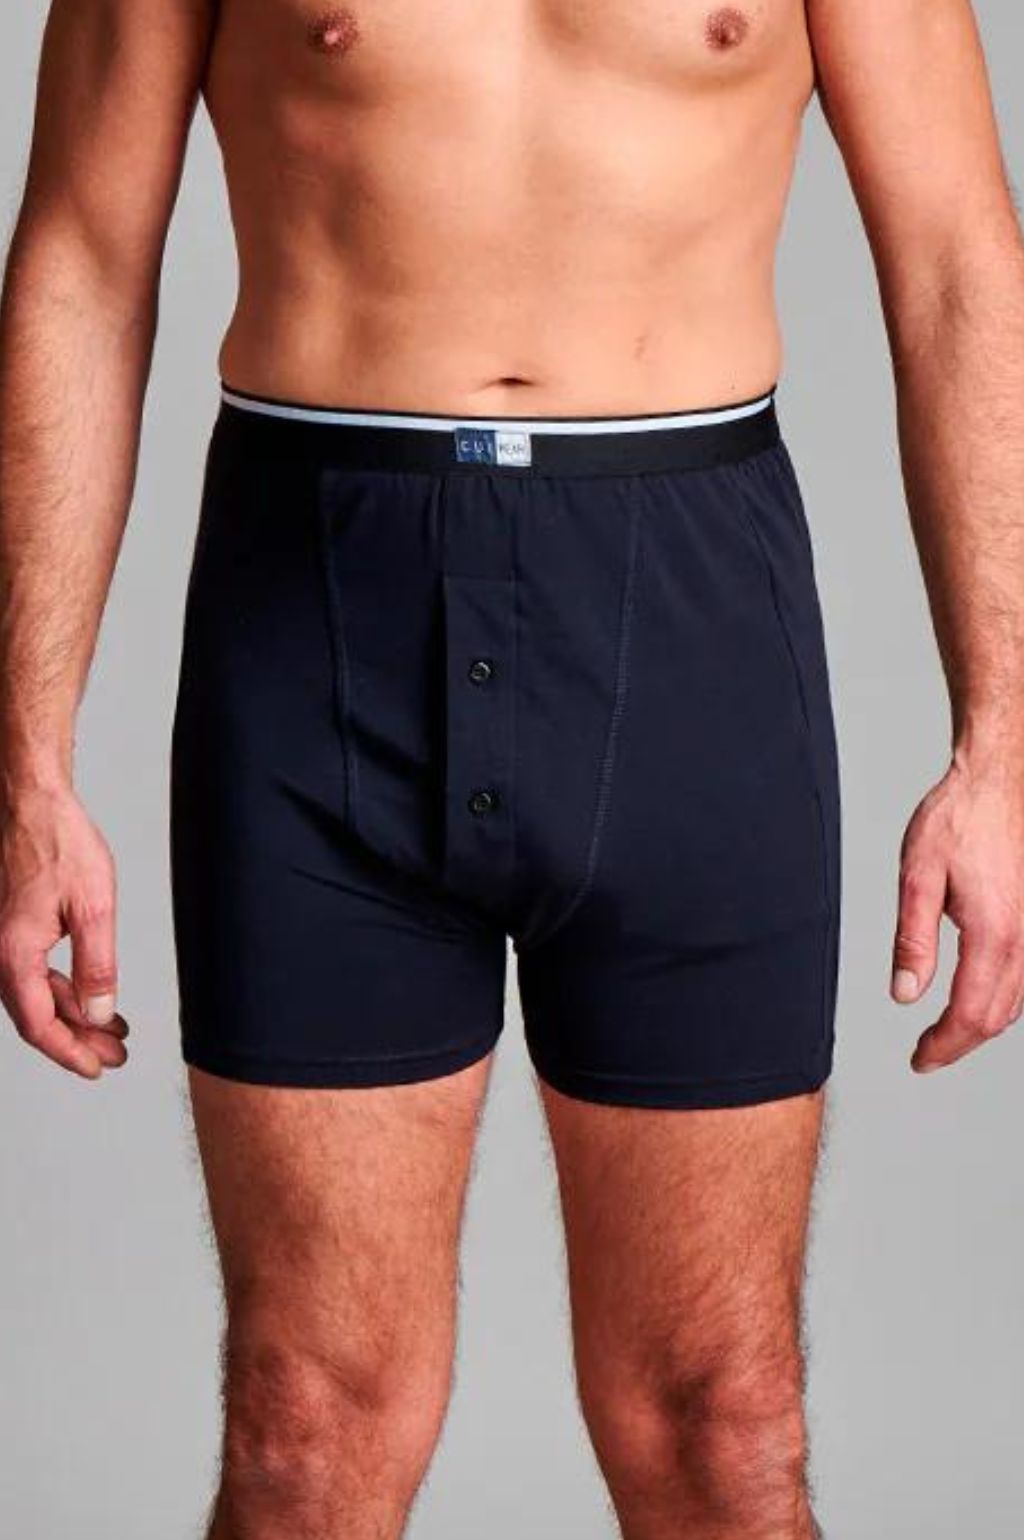 CUI Mens Ostomy High Waist Cotton Fitted Trunk - 1 each, SMALL, NAVY - RIGHT